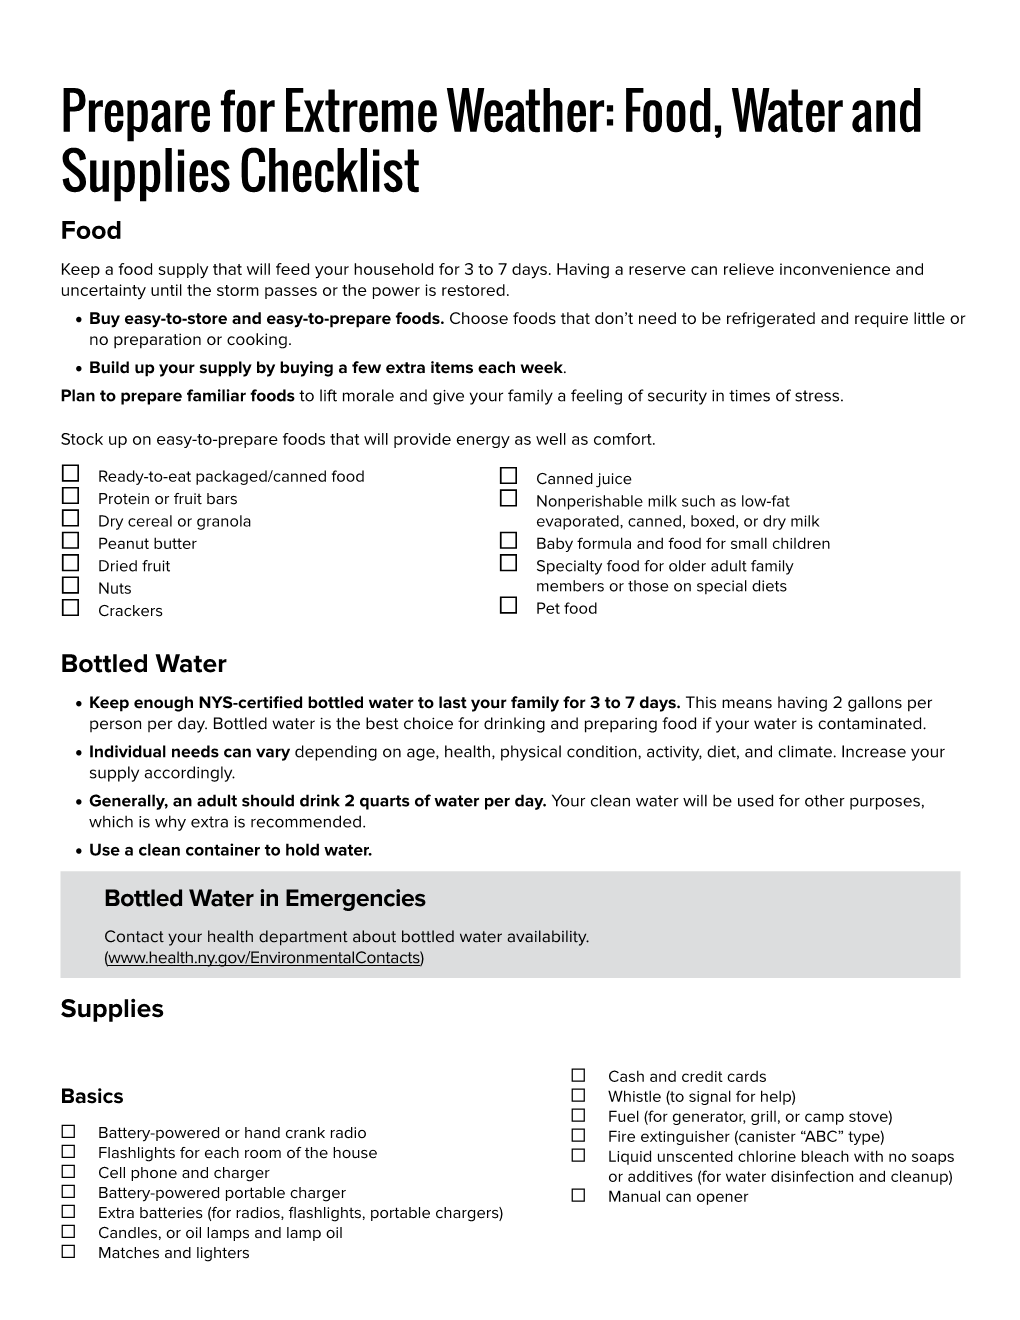 Prepare for Extreme Weather: Food Water and Supplies Checklist